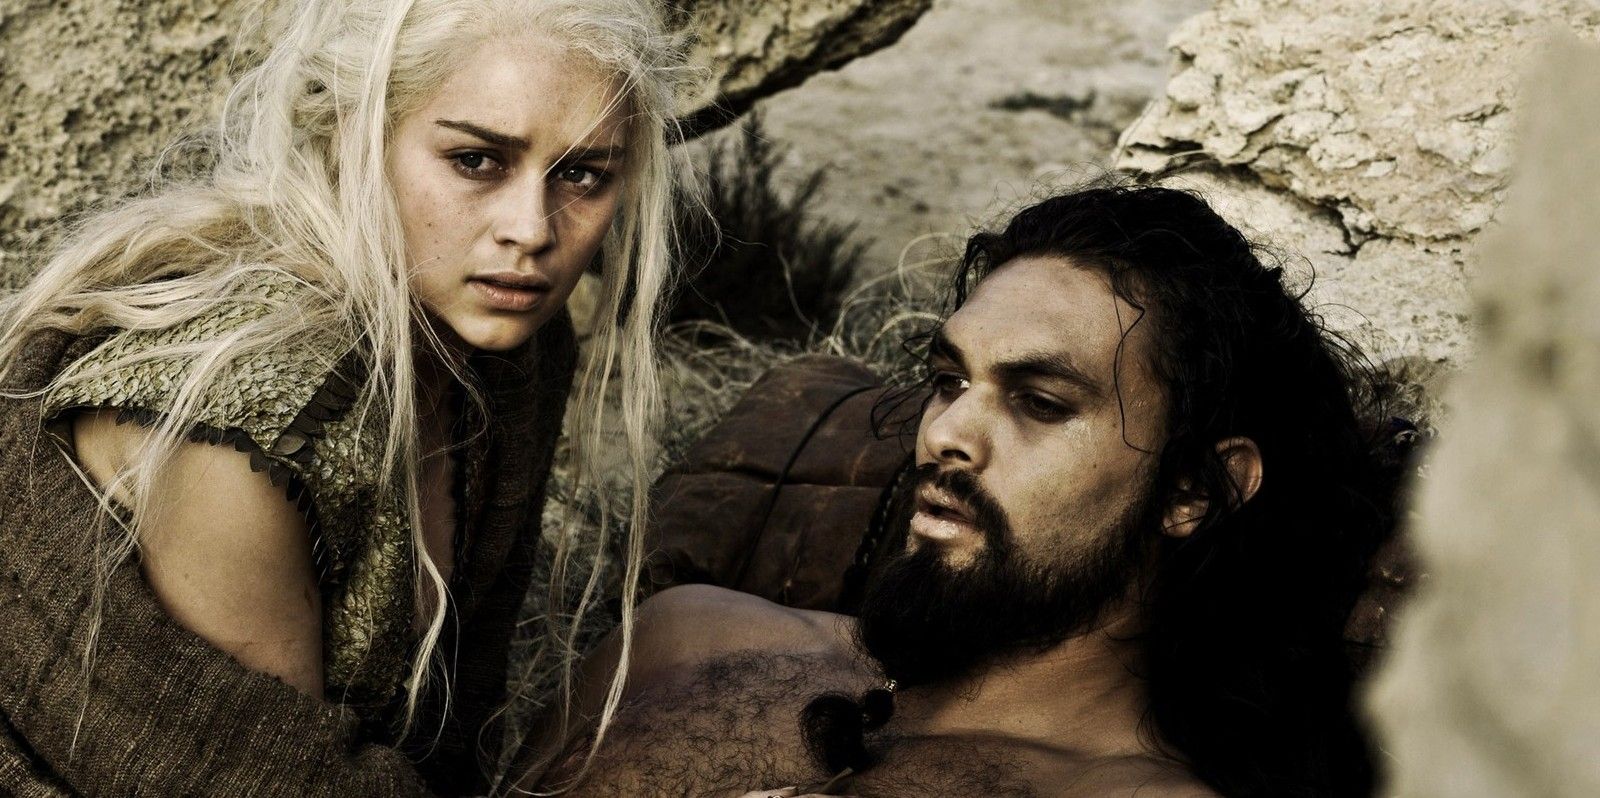 Game Of Thrones 5 Times We Felt Bad For Daenerys Targaryen (& 5 Times We Hated Her)